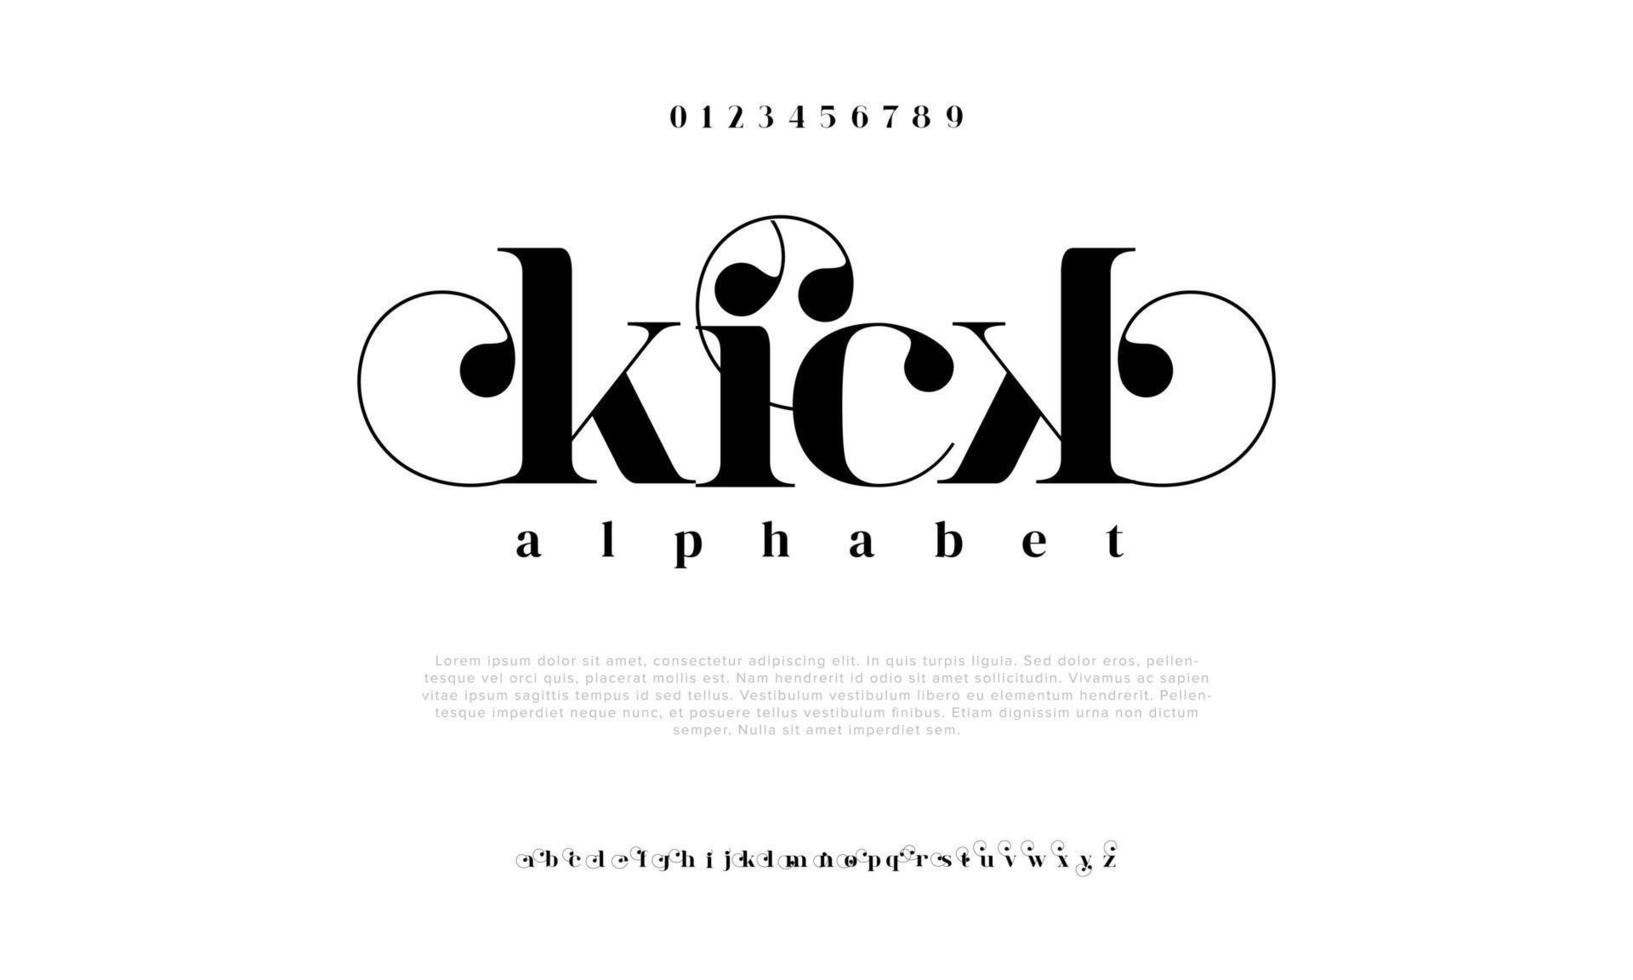 Kick abstract digital technology logo font alphabet. Minimal modern urban fonts for logo, brand etc. Typography typeface uppercase lowercase and number. vector illustration